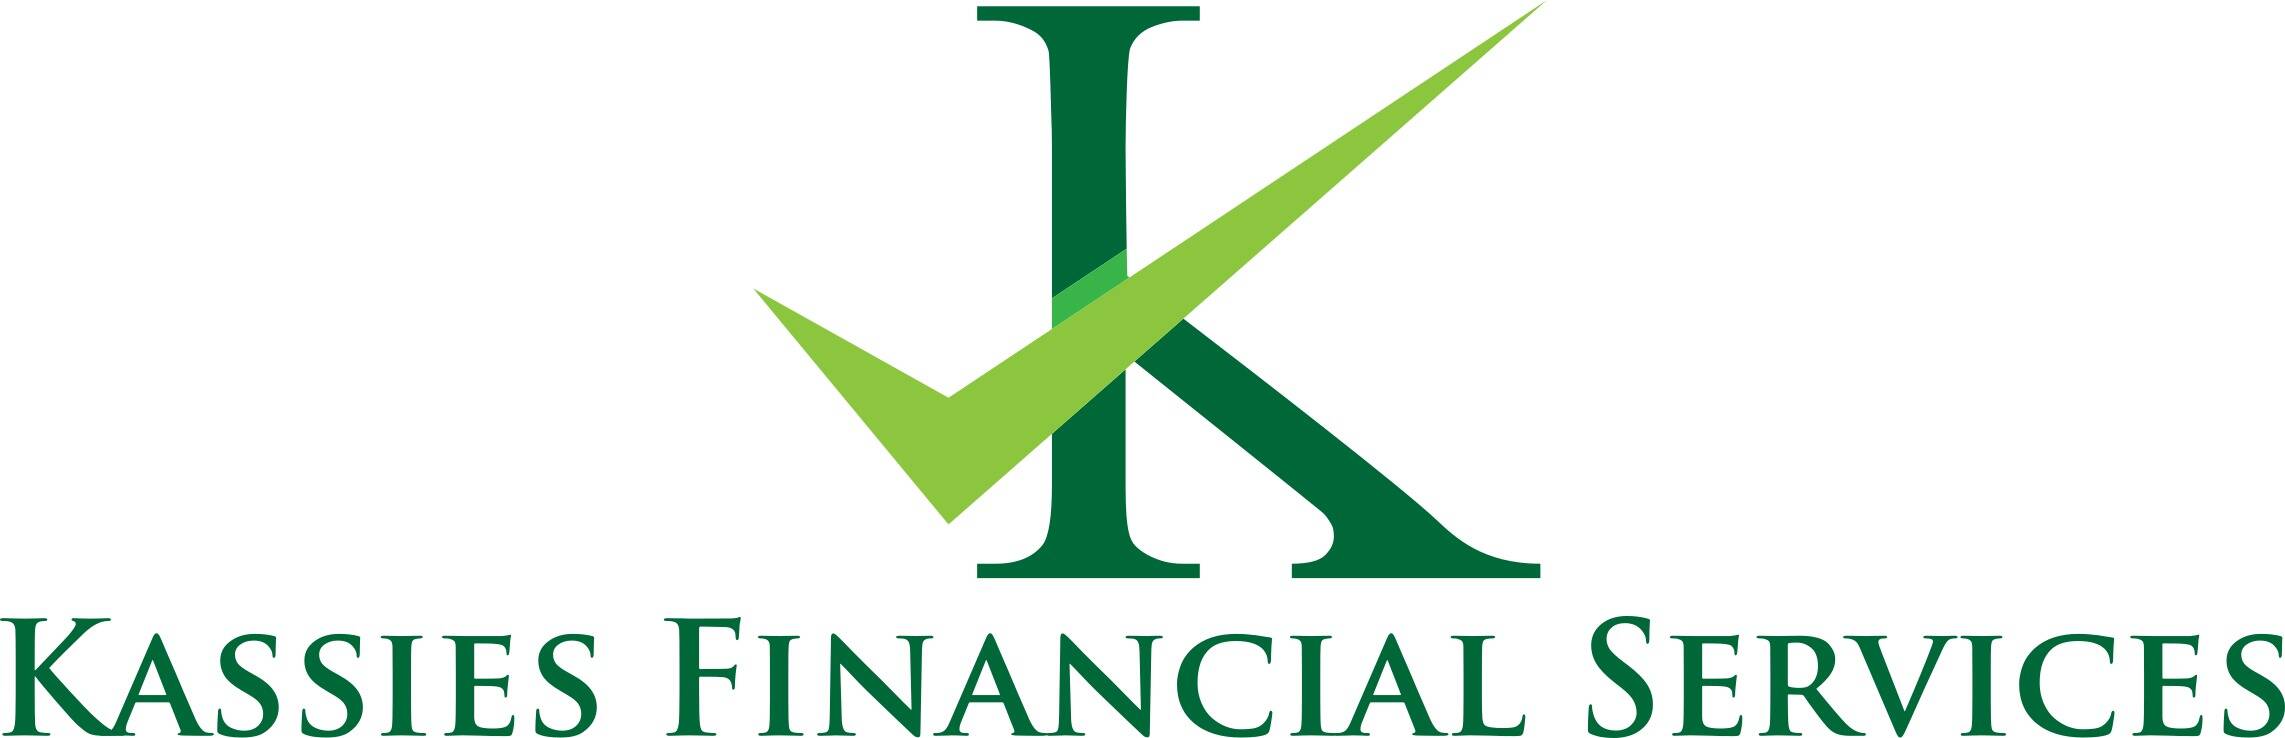 Kassies Financial Services